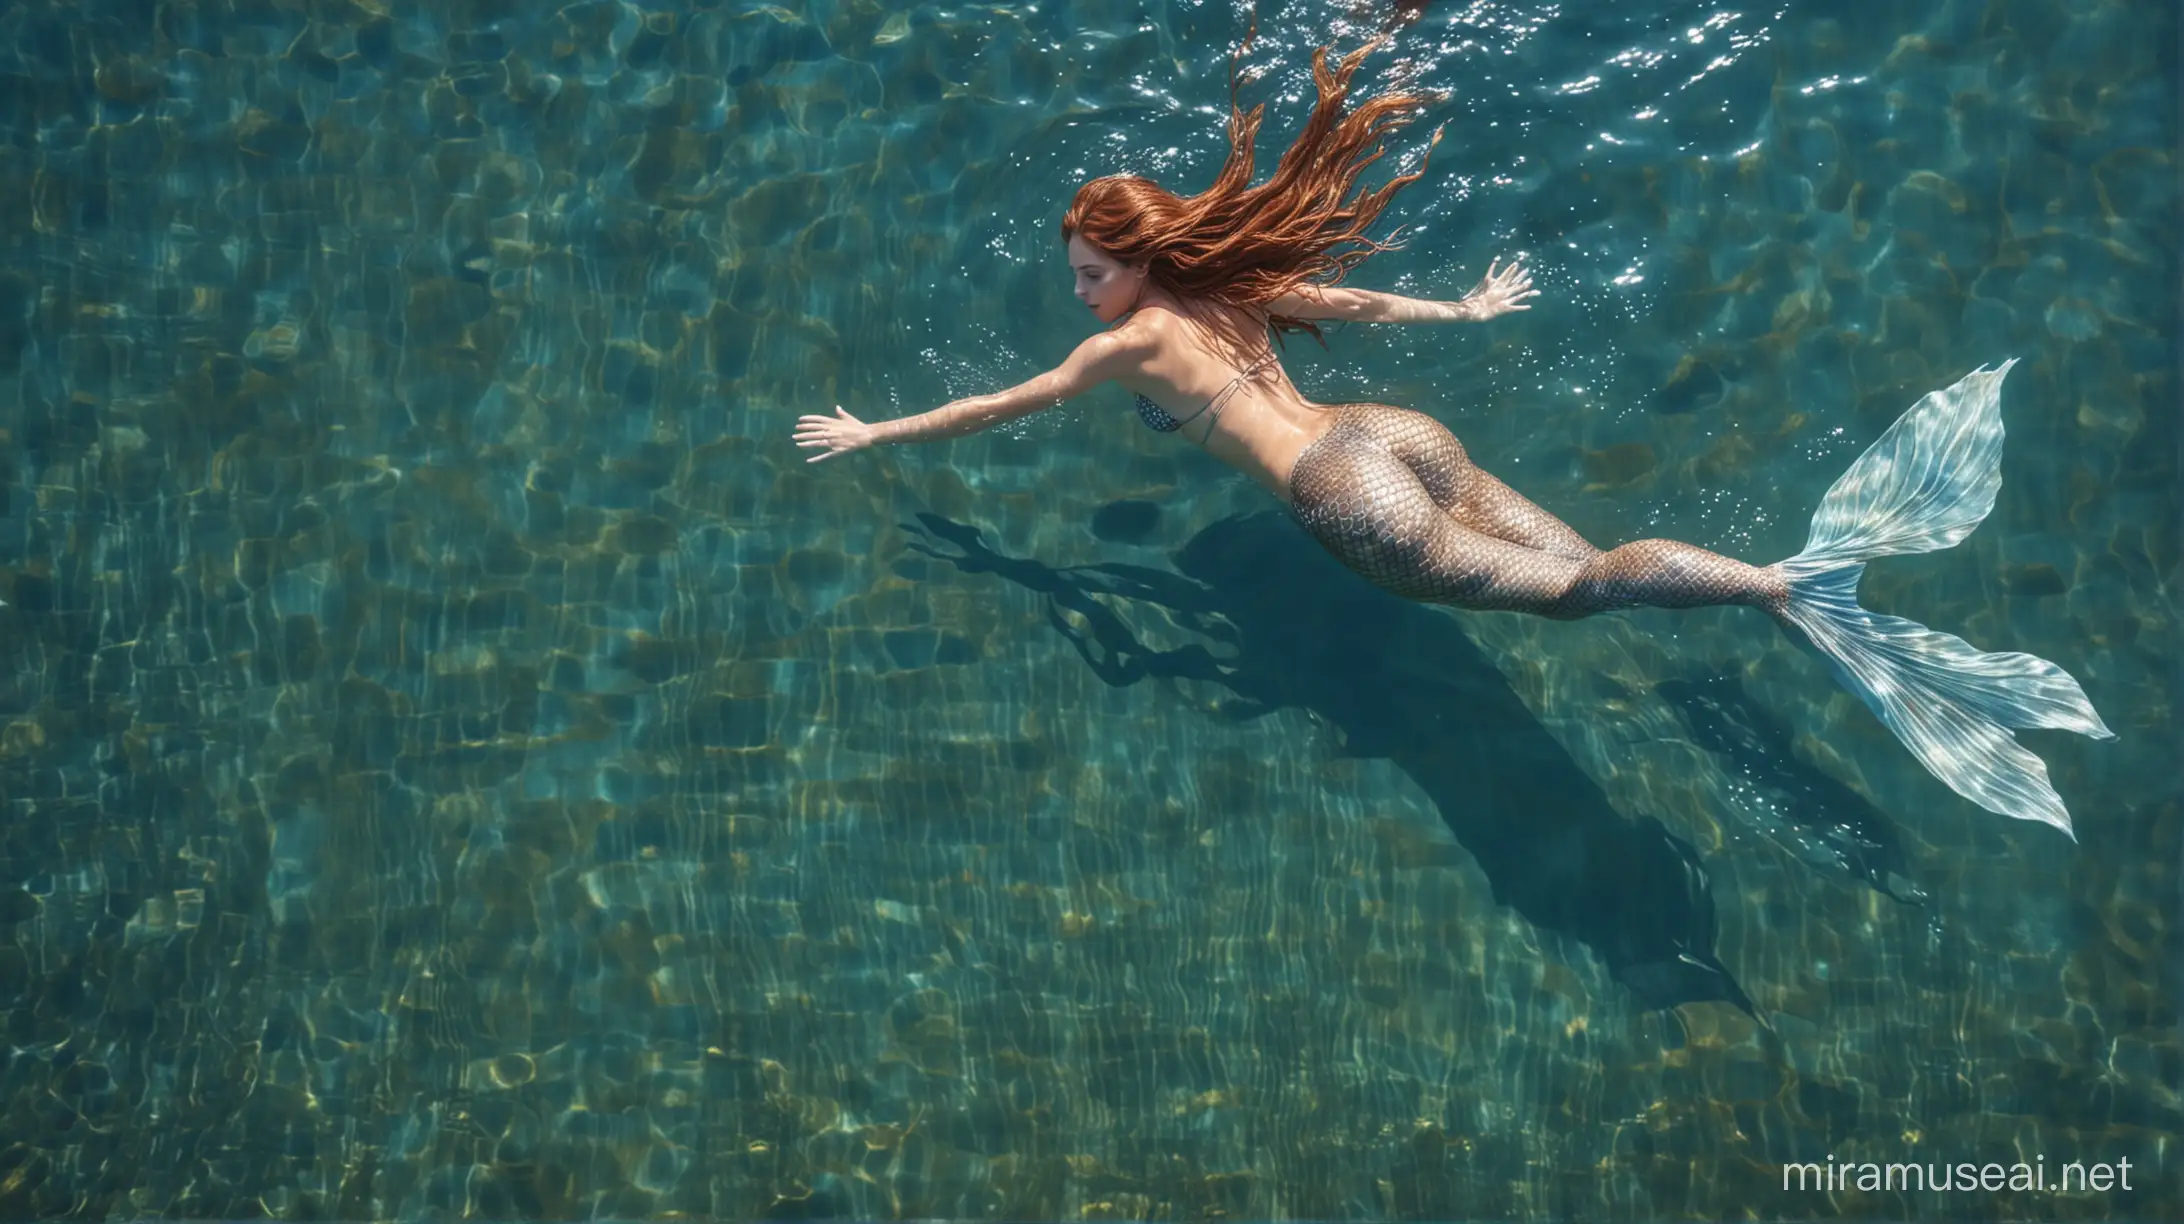 Graceful BrownHaired Mermaid Swimming in Tranquil Blue Waters